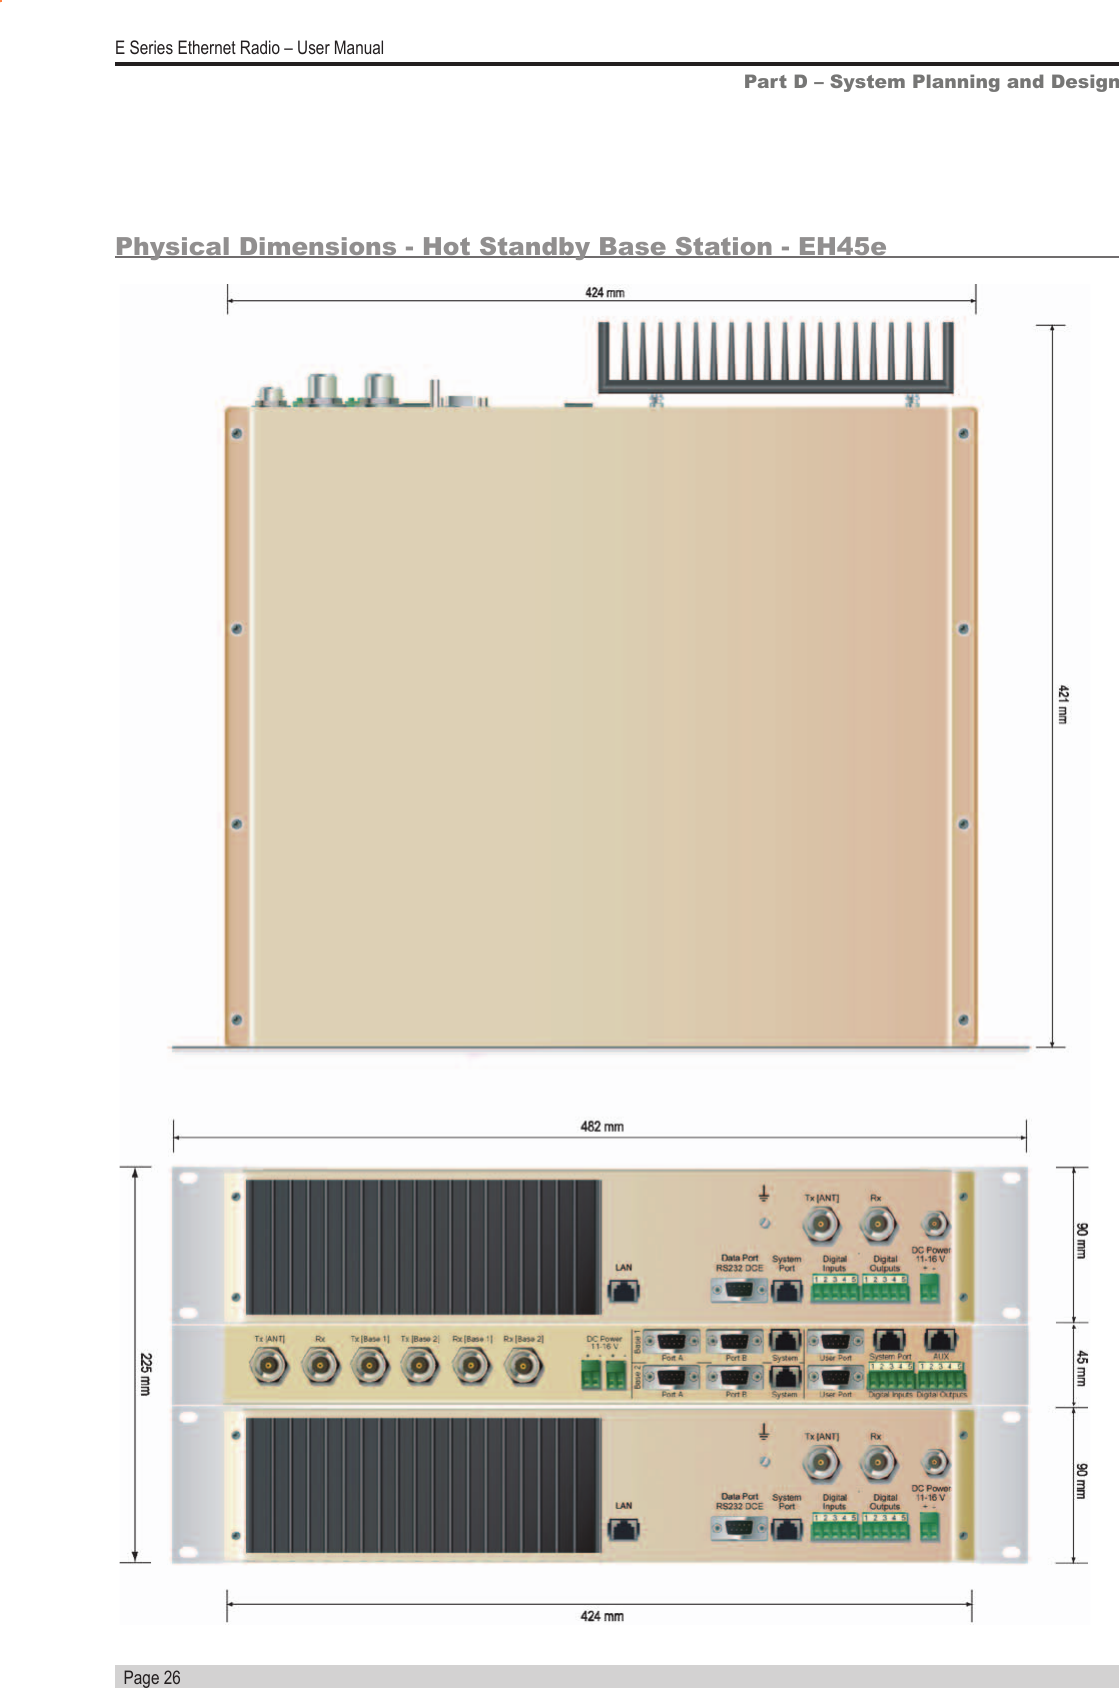   Page 26E Series Ethernet Radio – User ManualPhysical Dimensions - Hot Standby Base Station - EH45ePart D – System Planning and Design